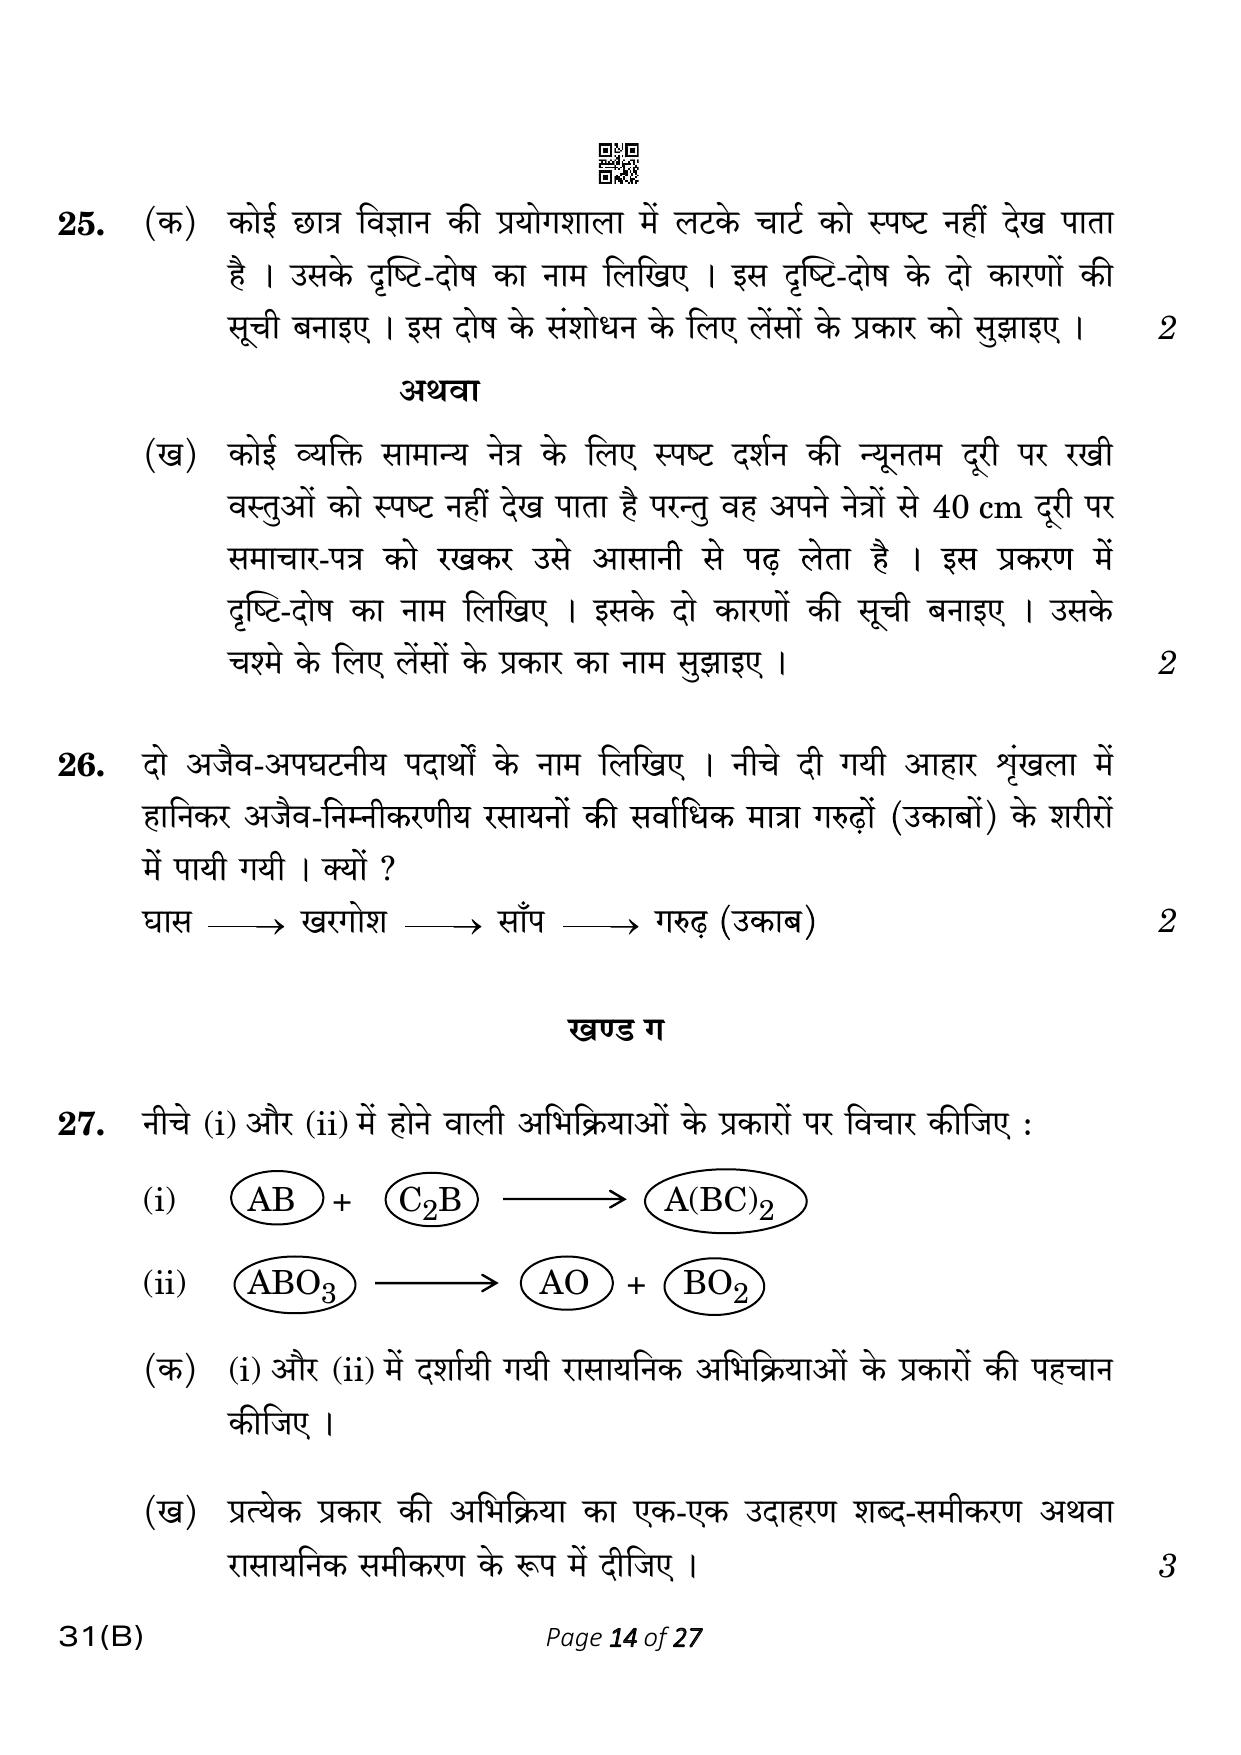 CBSE Class 10 31-B Science 2023 (Compartment) Question Paper - Page 14